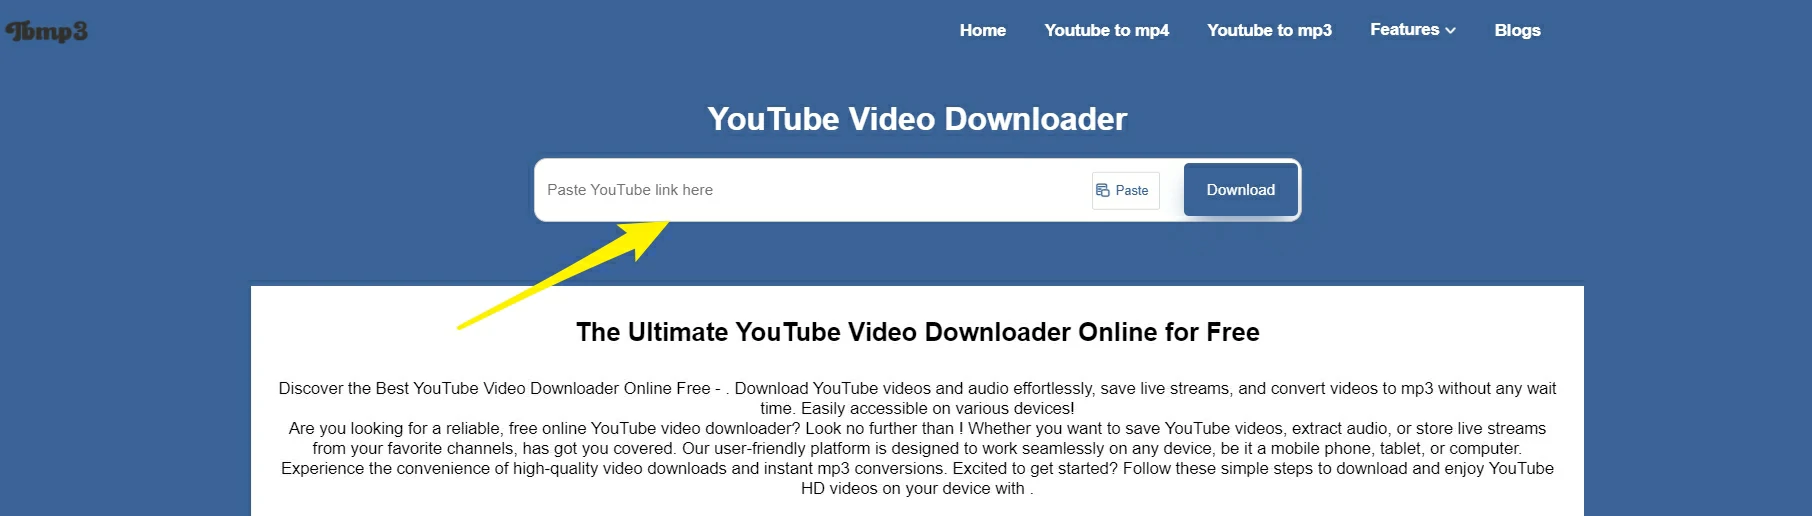 youtube download